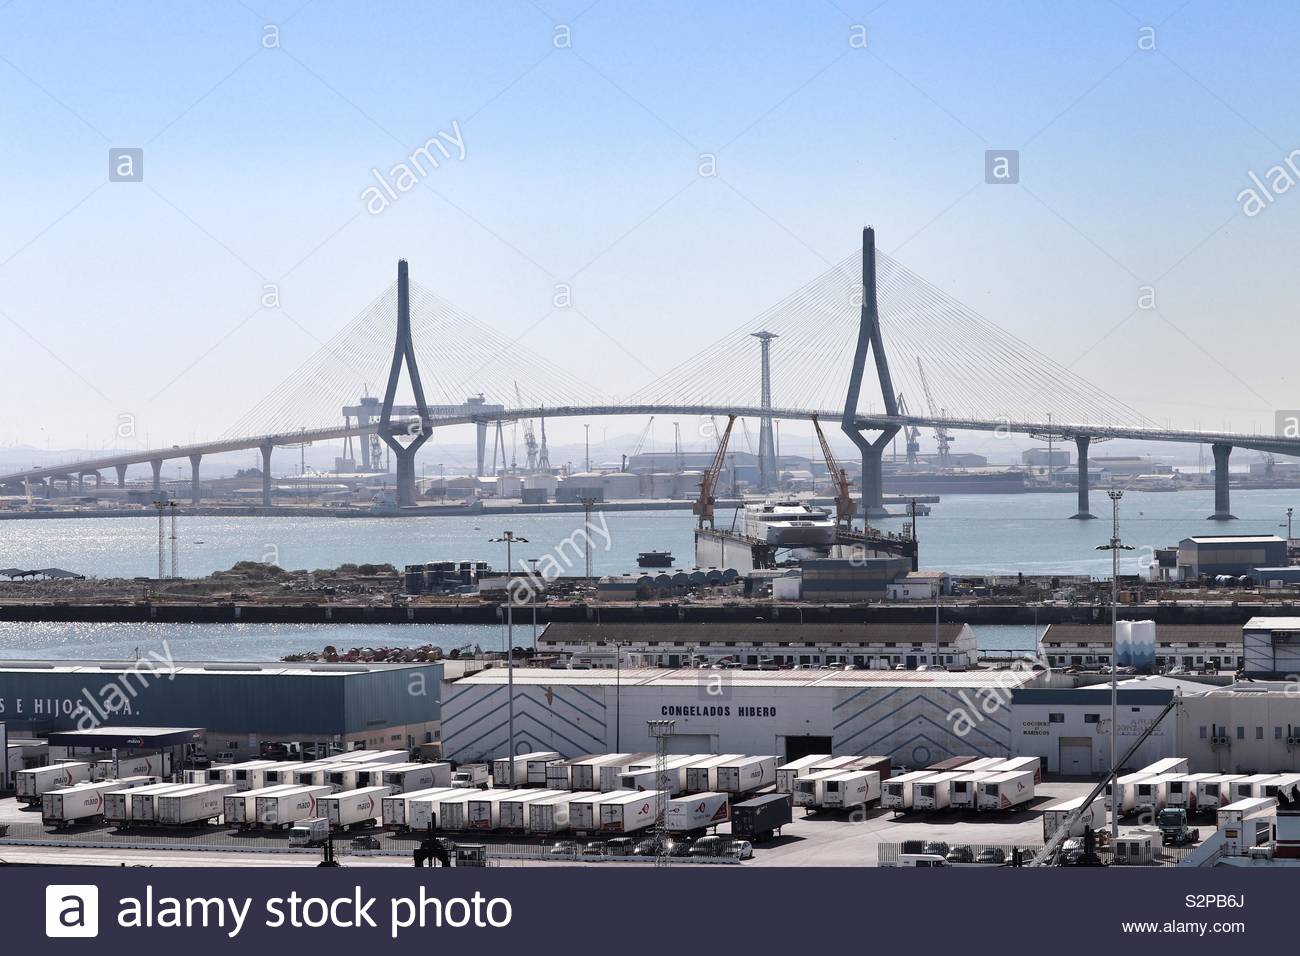 Industrial port with road bridge in background Stock Photo